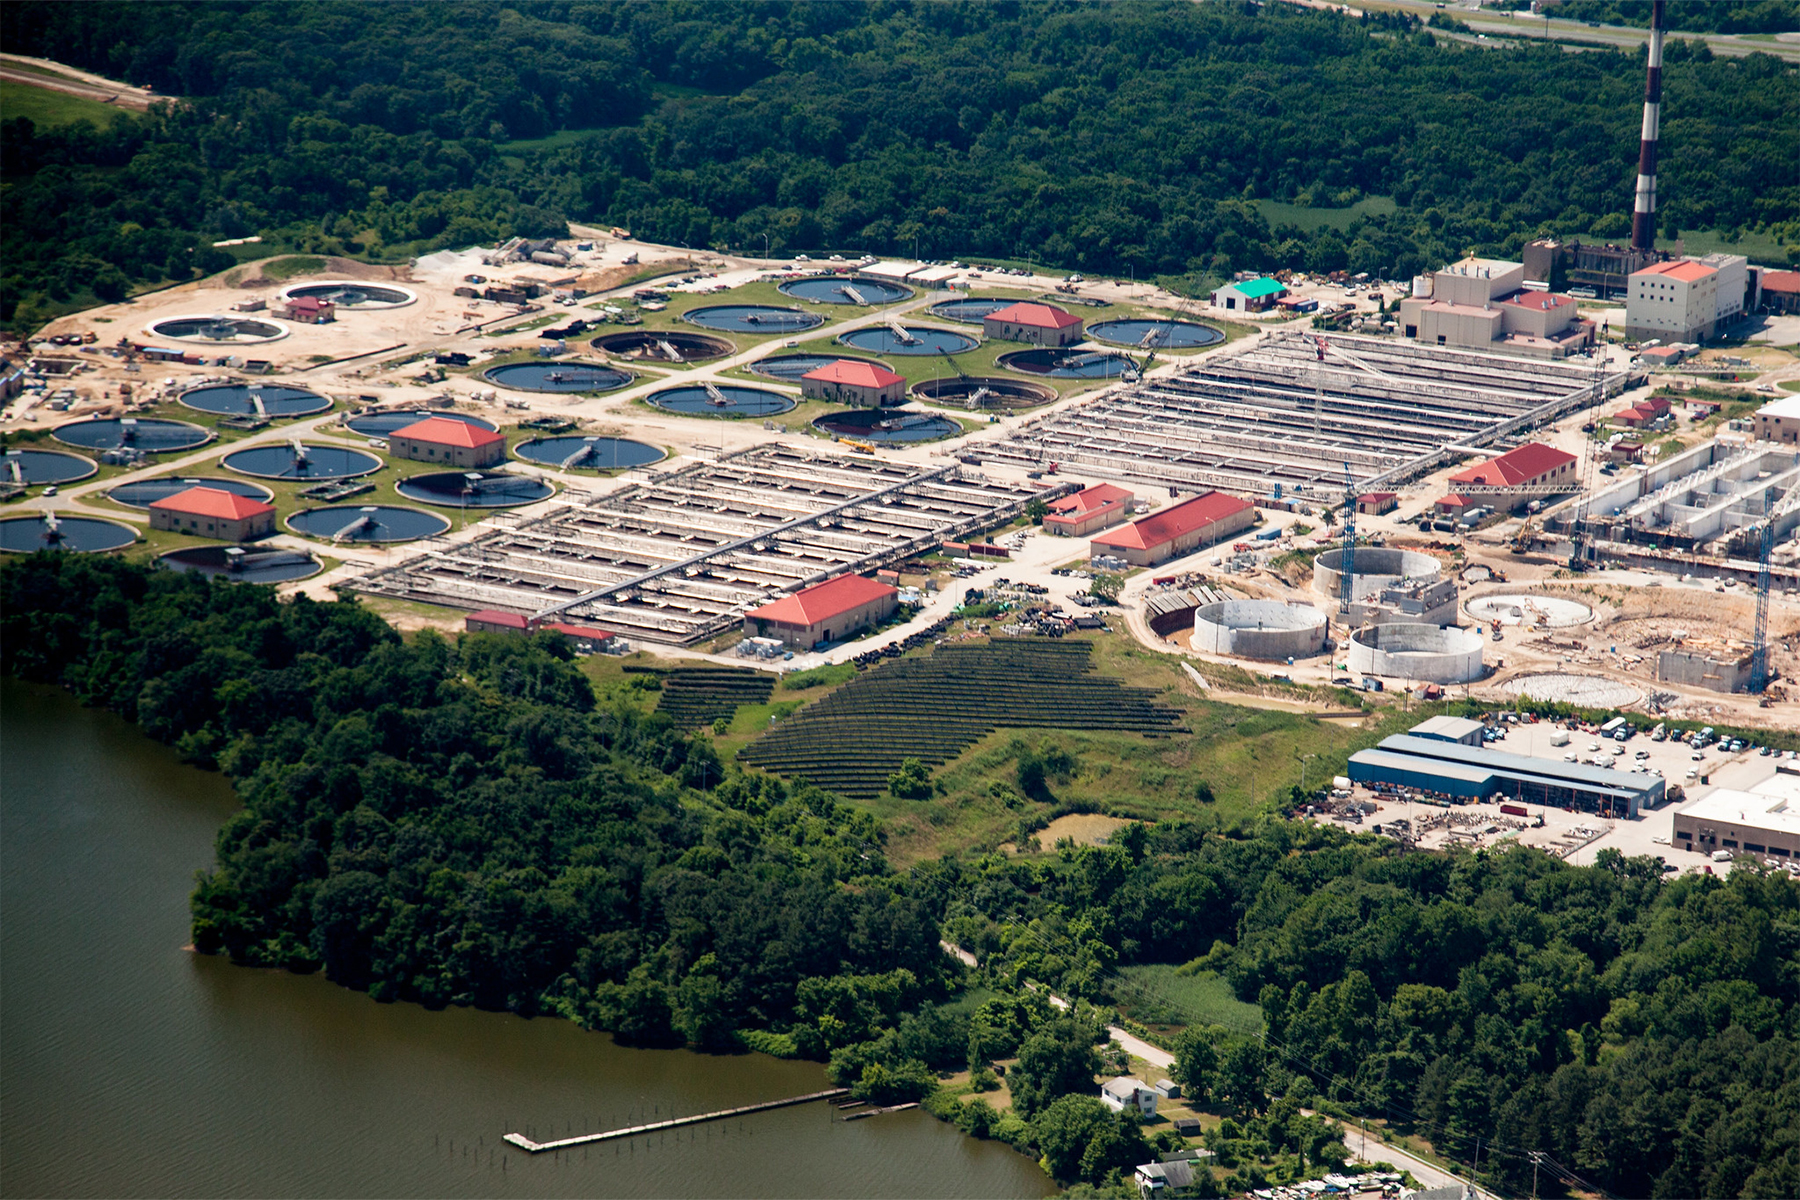 Photo of a wastewater treatment plant.